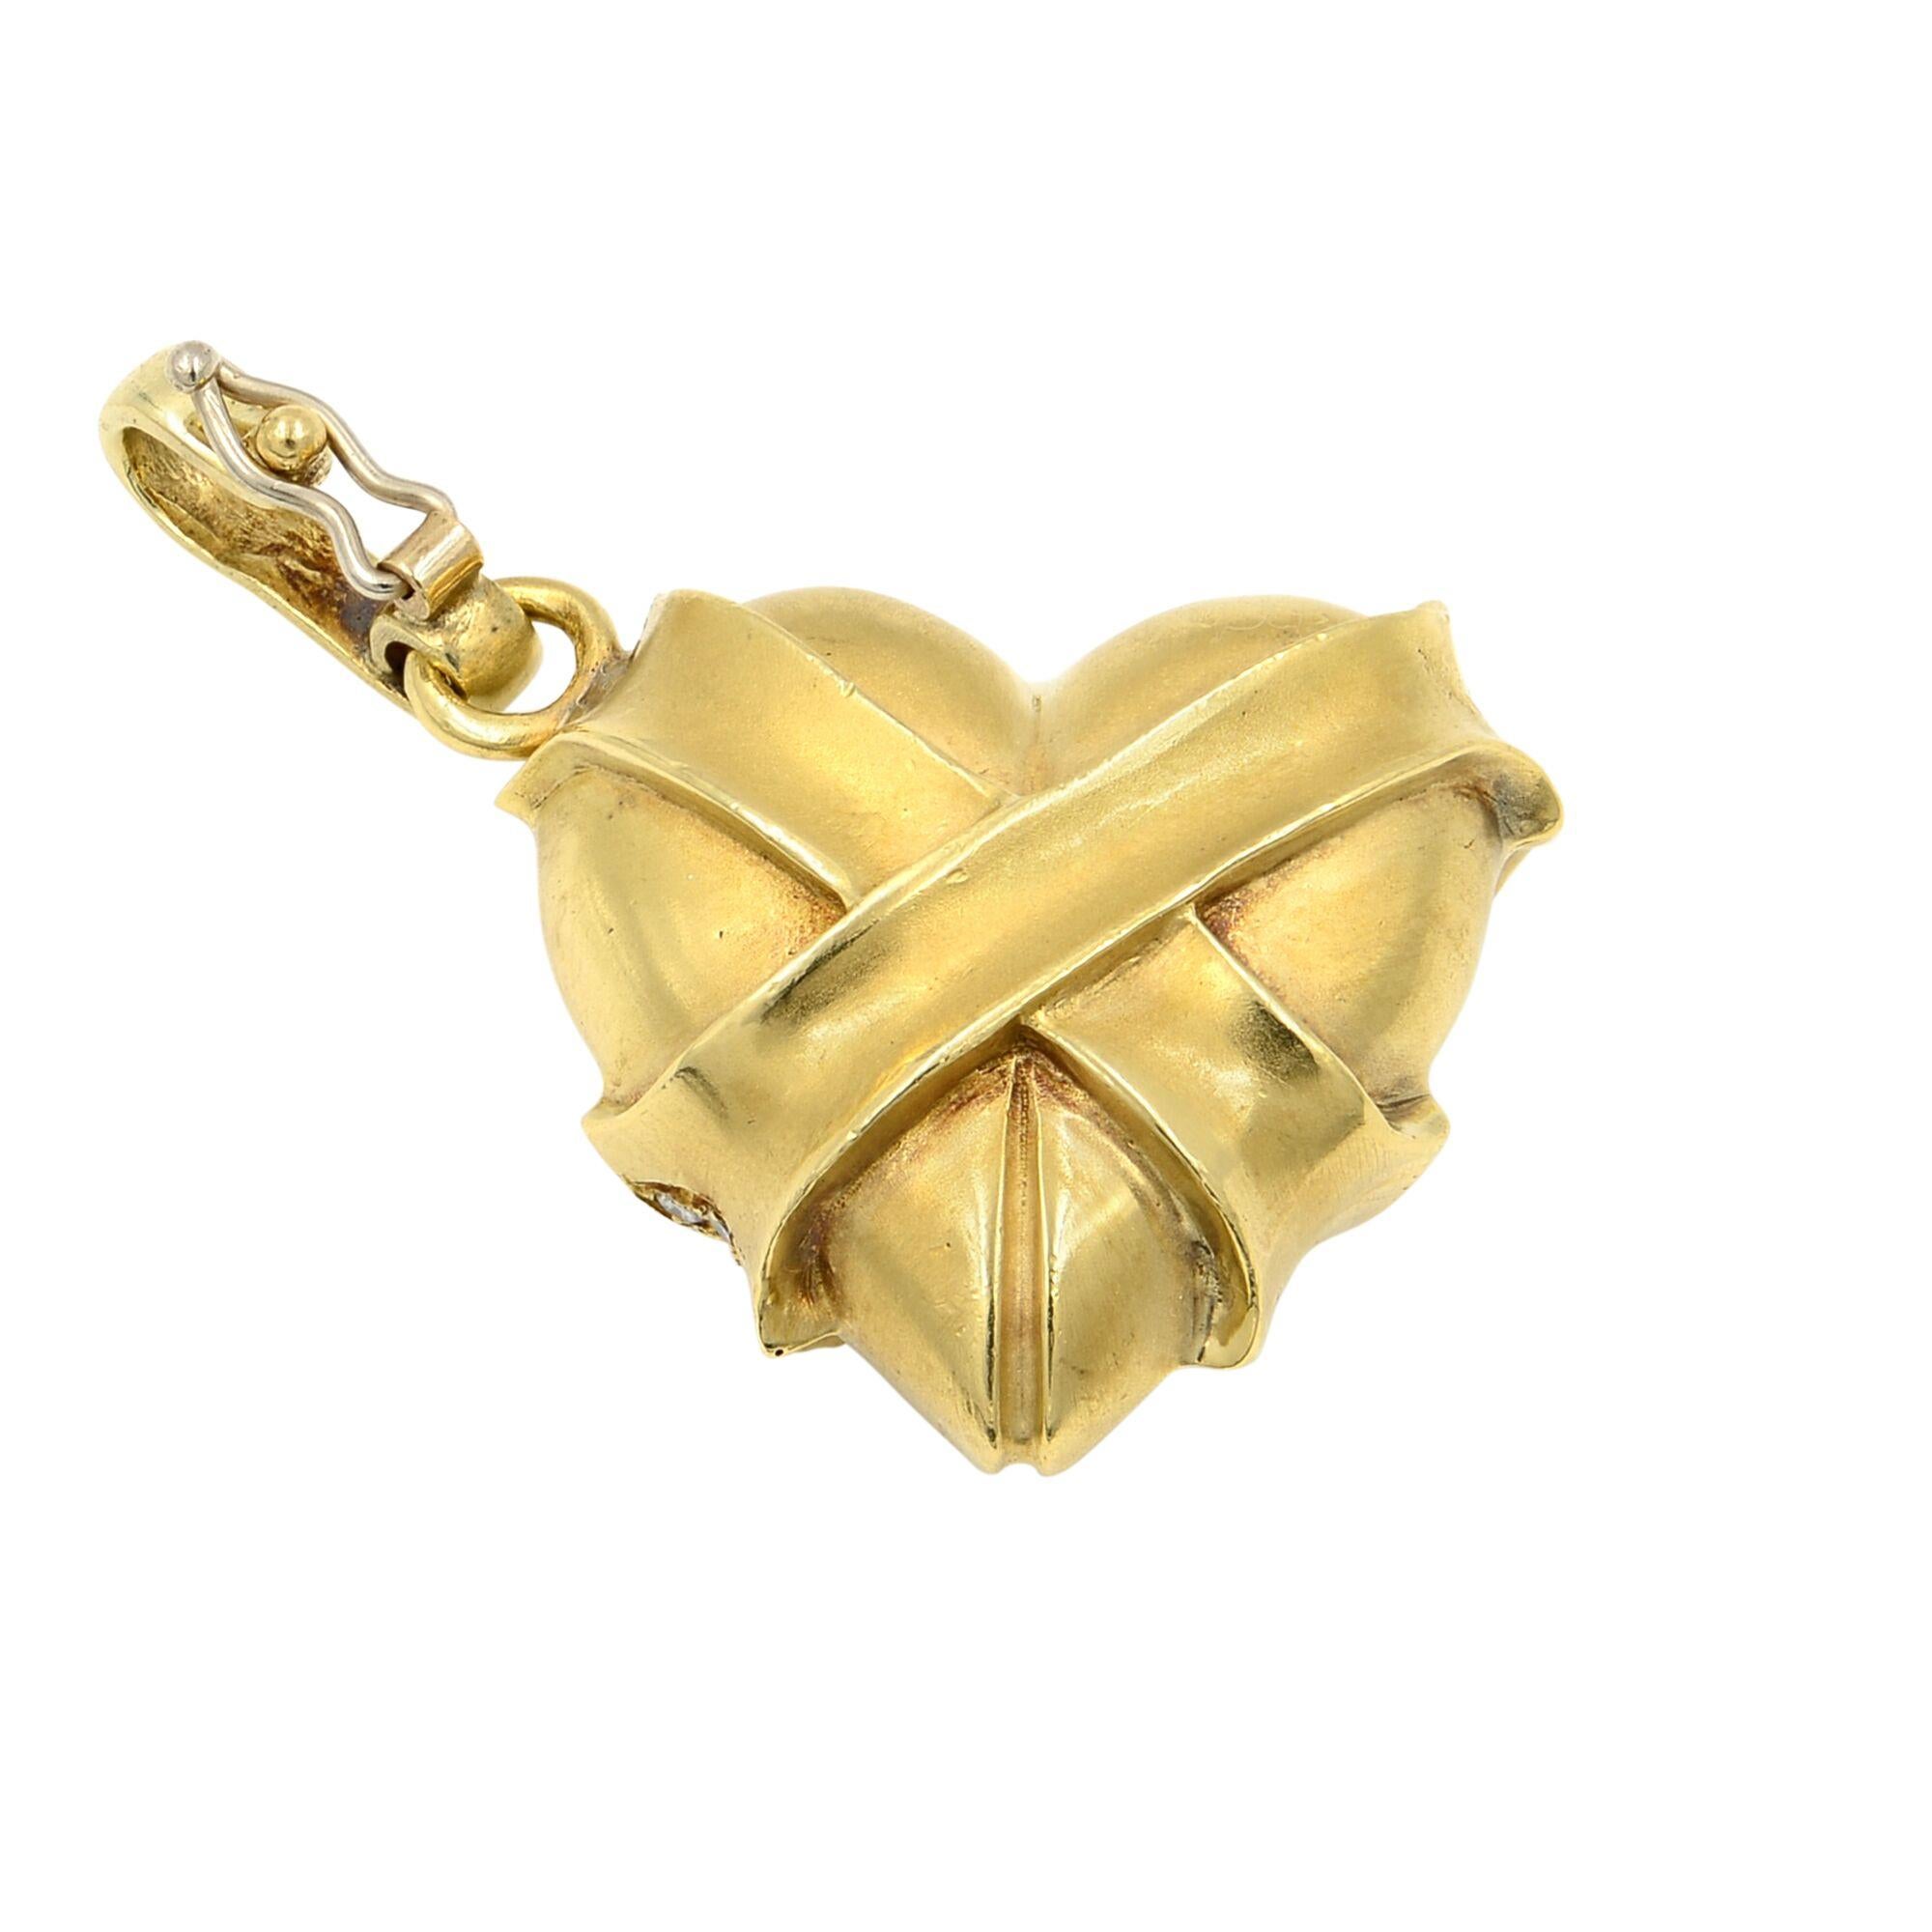 A pre-owned, excellent condition solid heart pendant with pave set round brilliant cut diamonds. Crafted in solid 14K yellow gold. Total diamond weight: 1.00 carat. Pendant size: 25mm. Total gram weight: 28.70 gms. Comes with a presentable gift box.